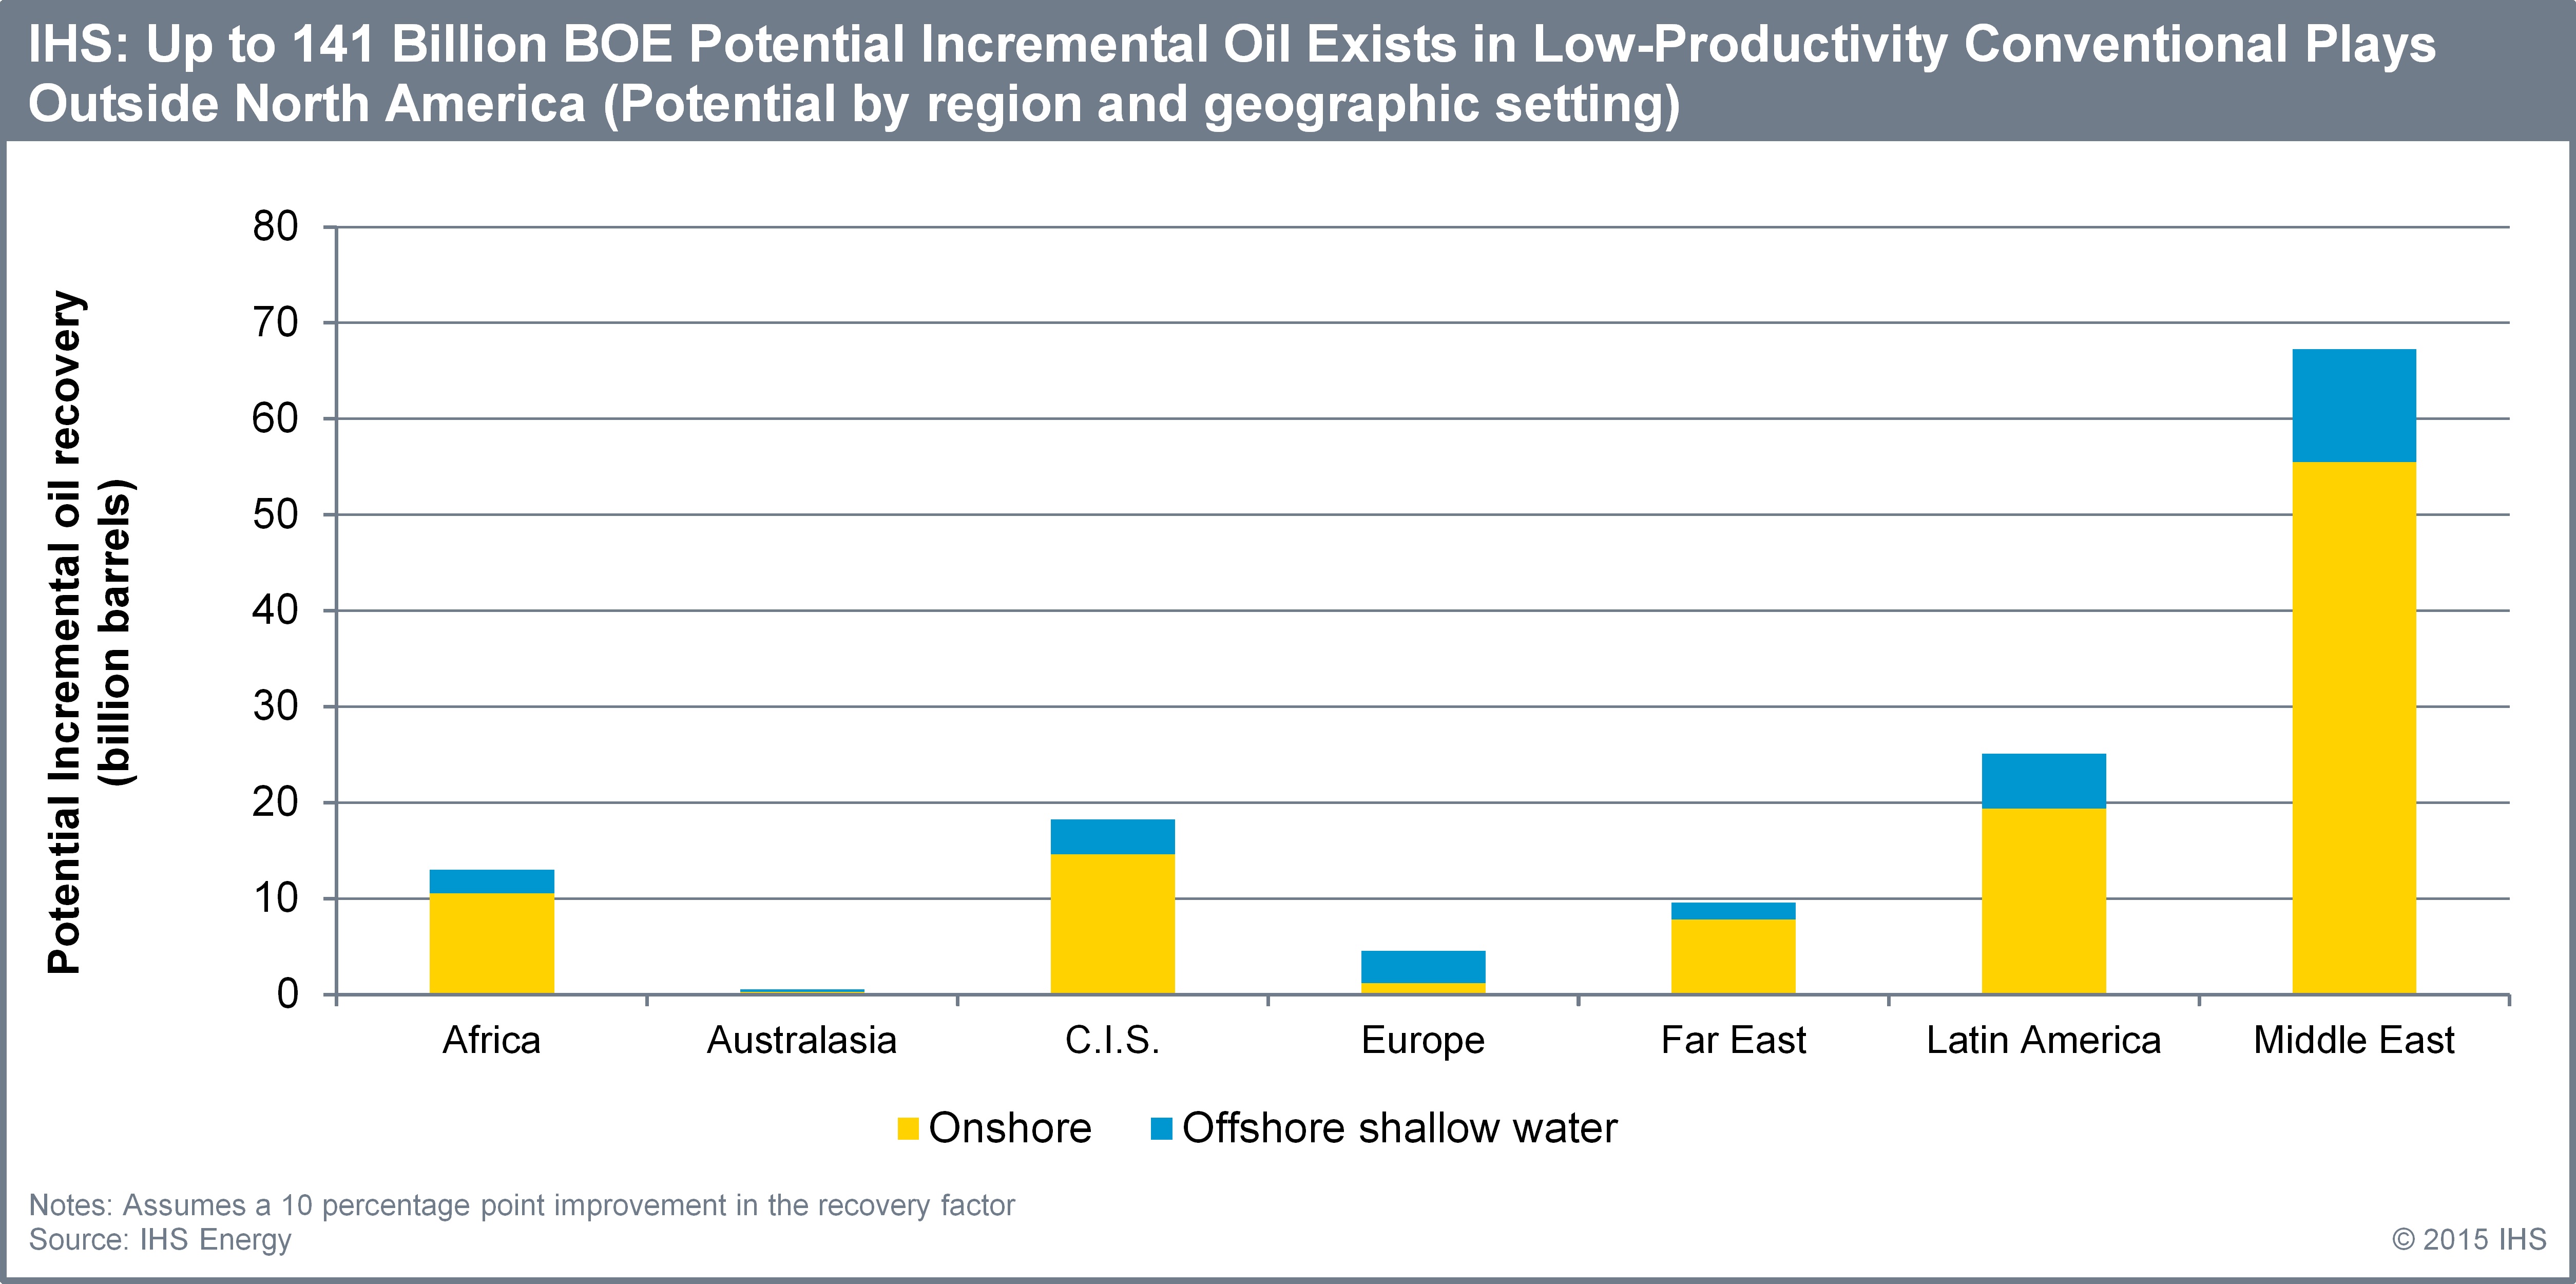 IHS, up to 141 billion boe potential, outside North America, fracking, graph